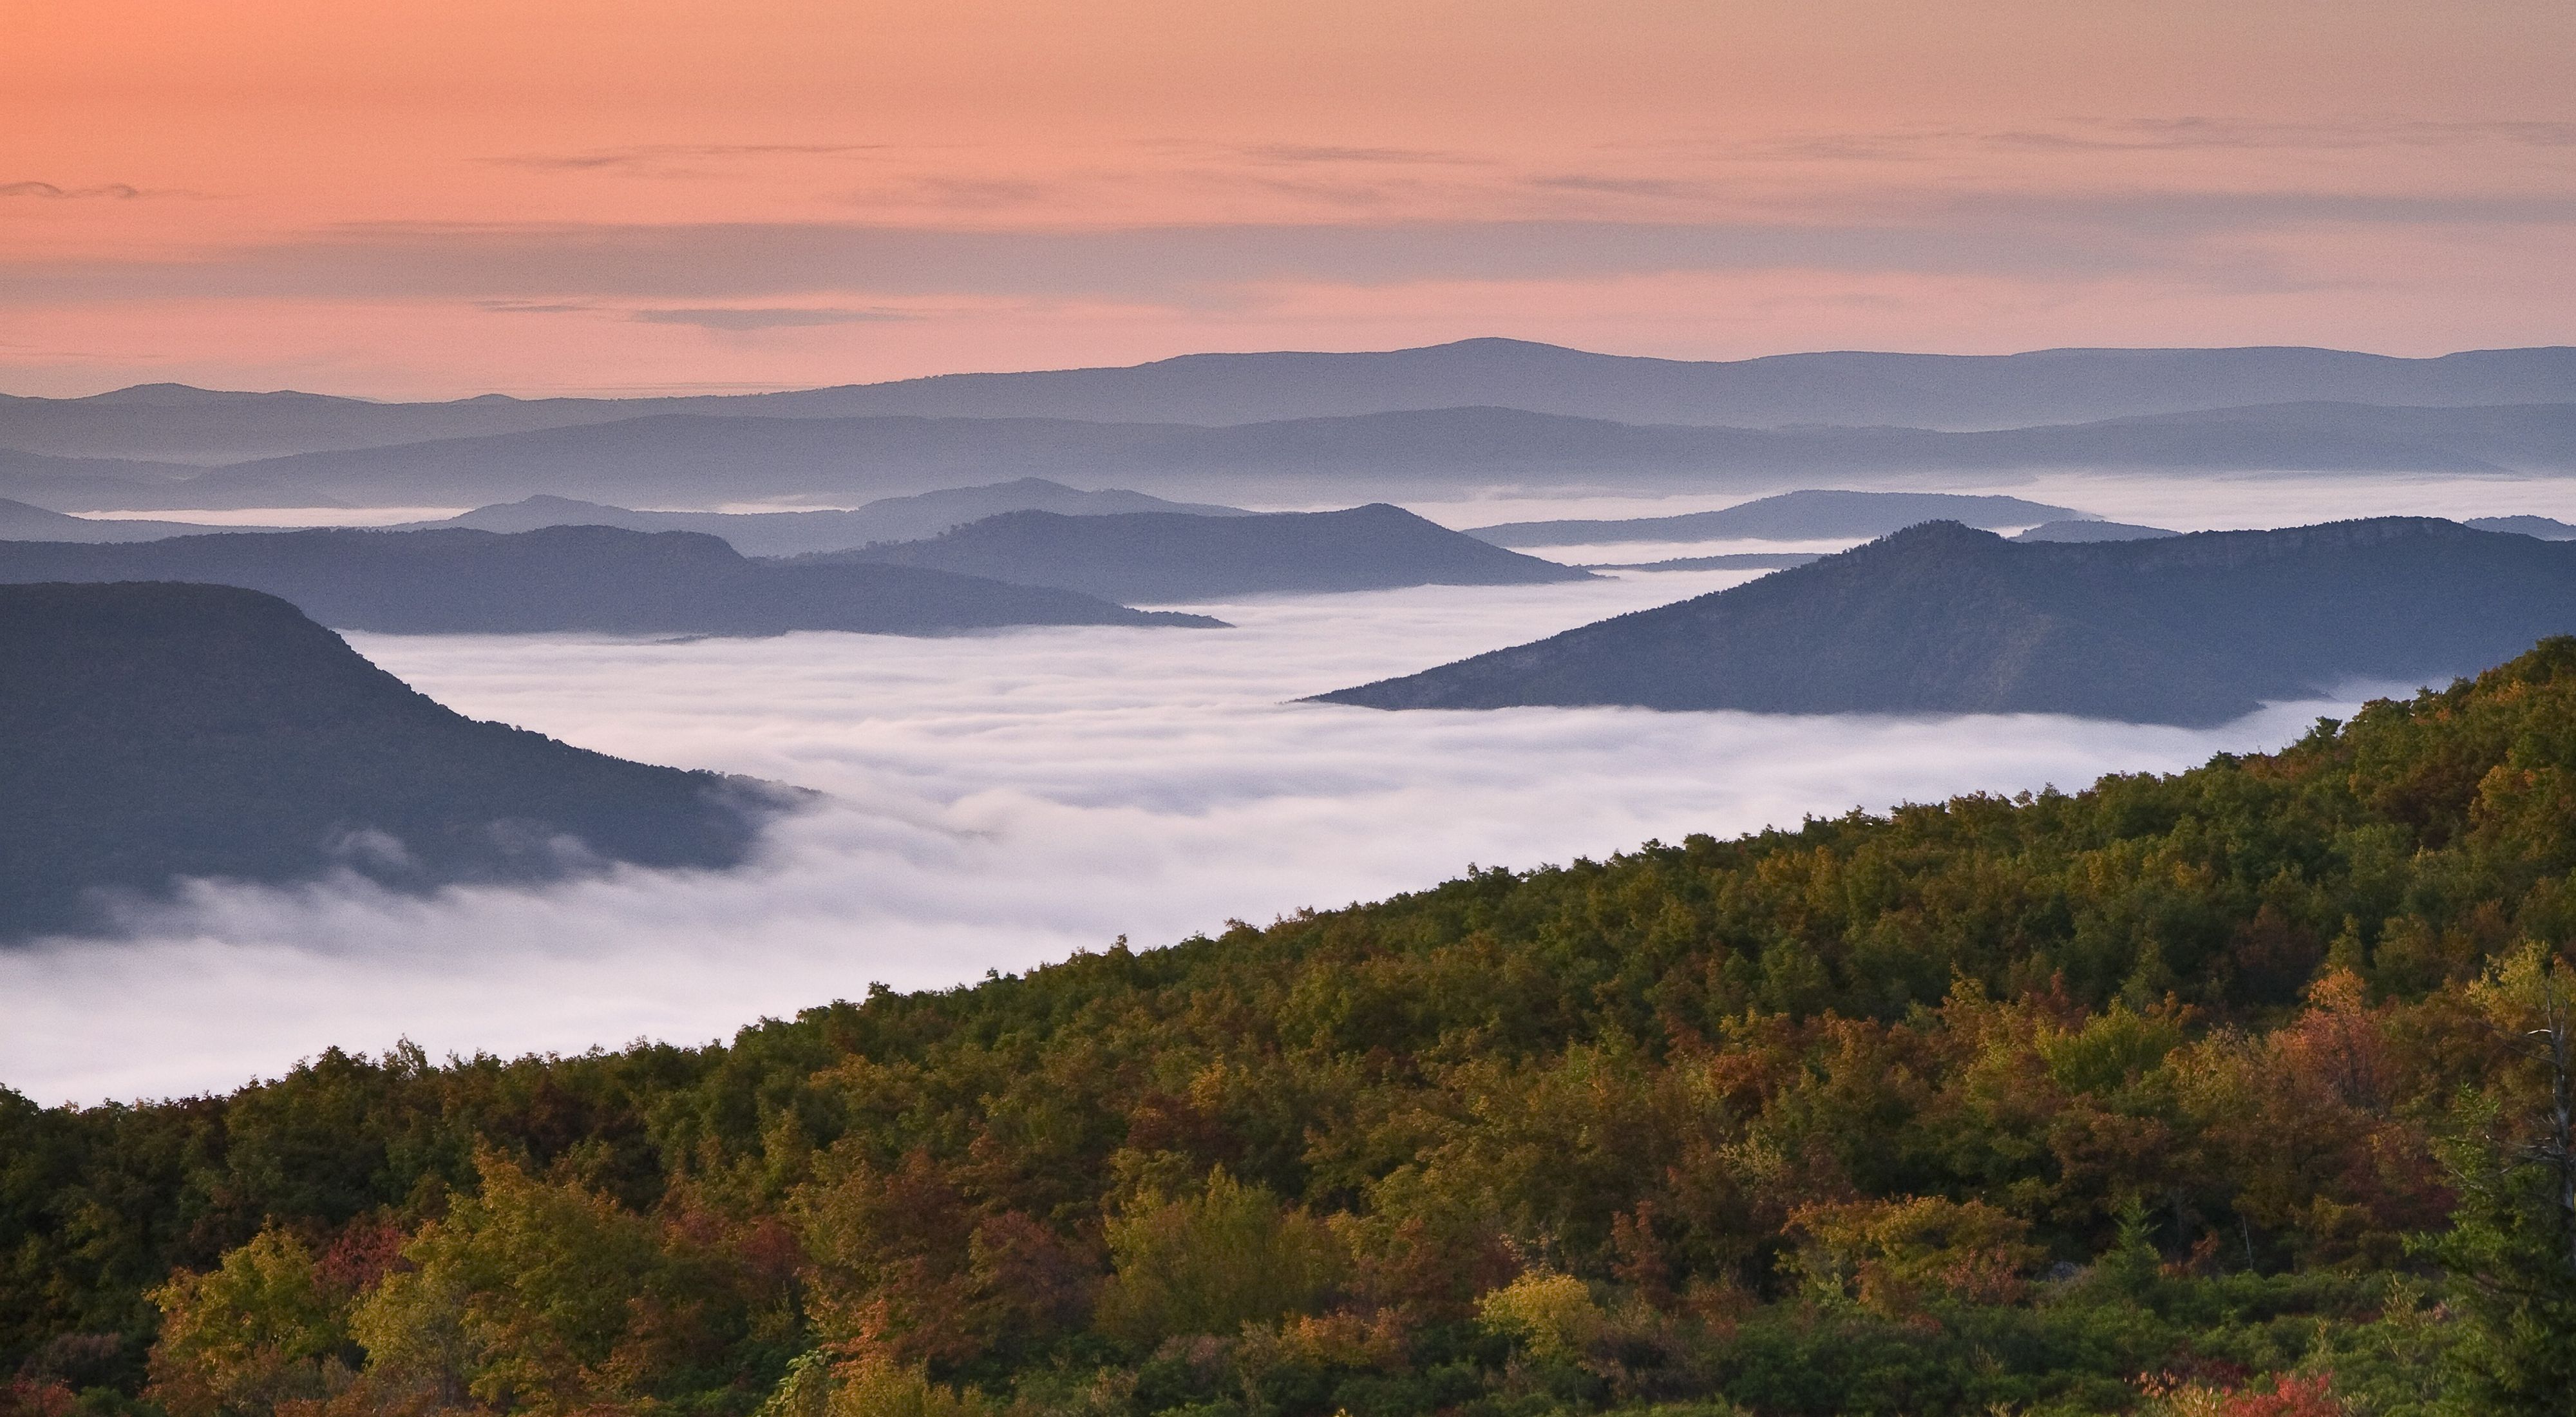 A view of misty mountain tops against an orange-and-pink sky.